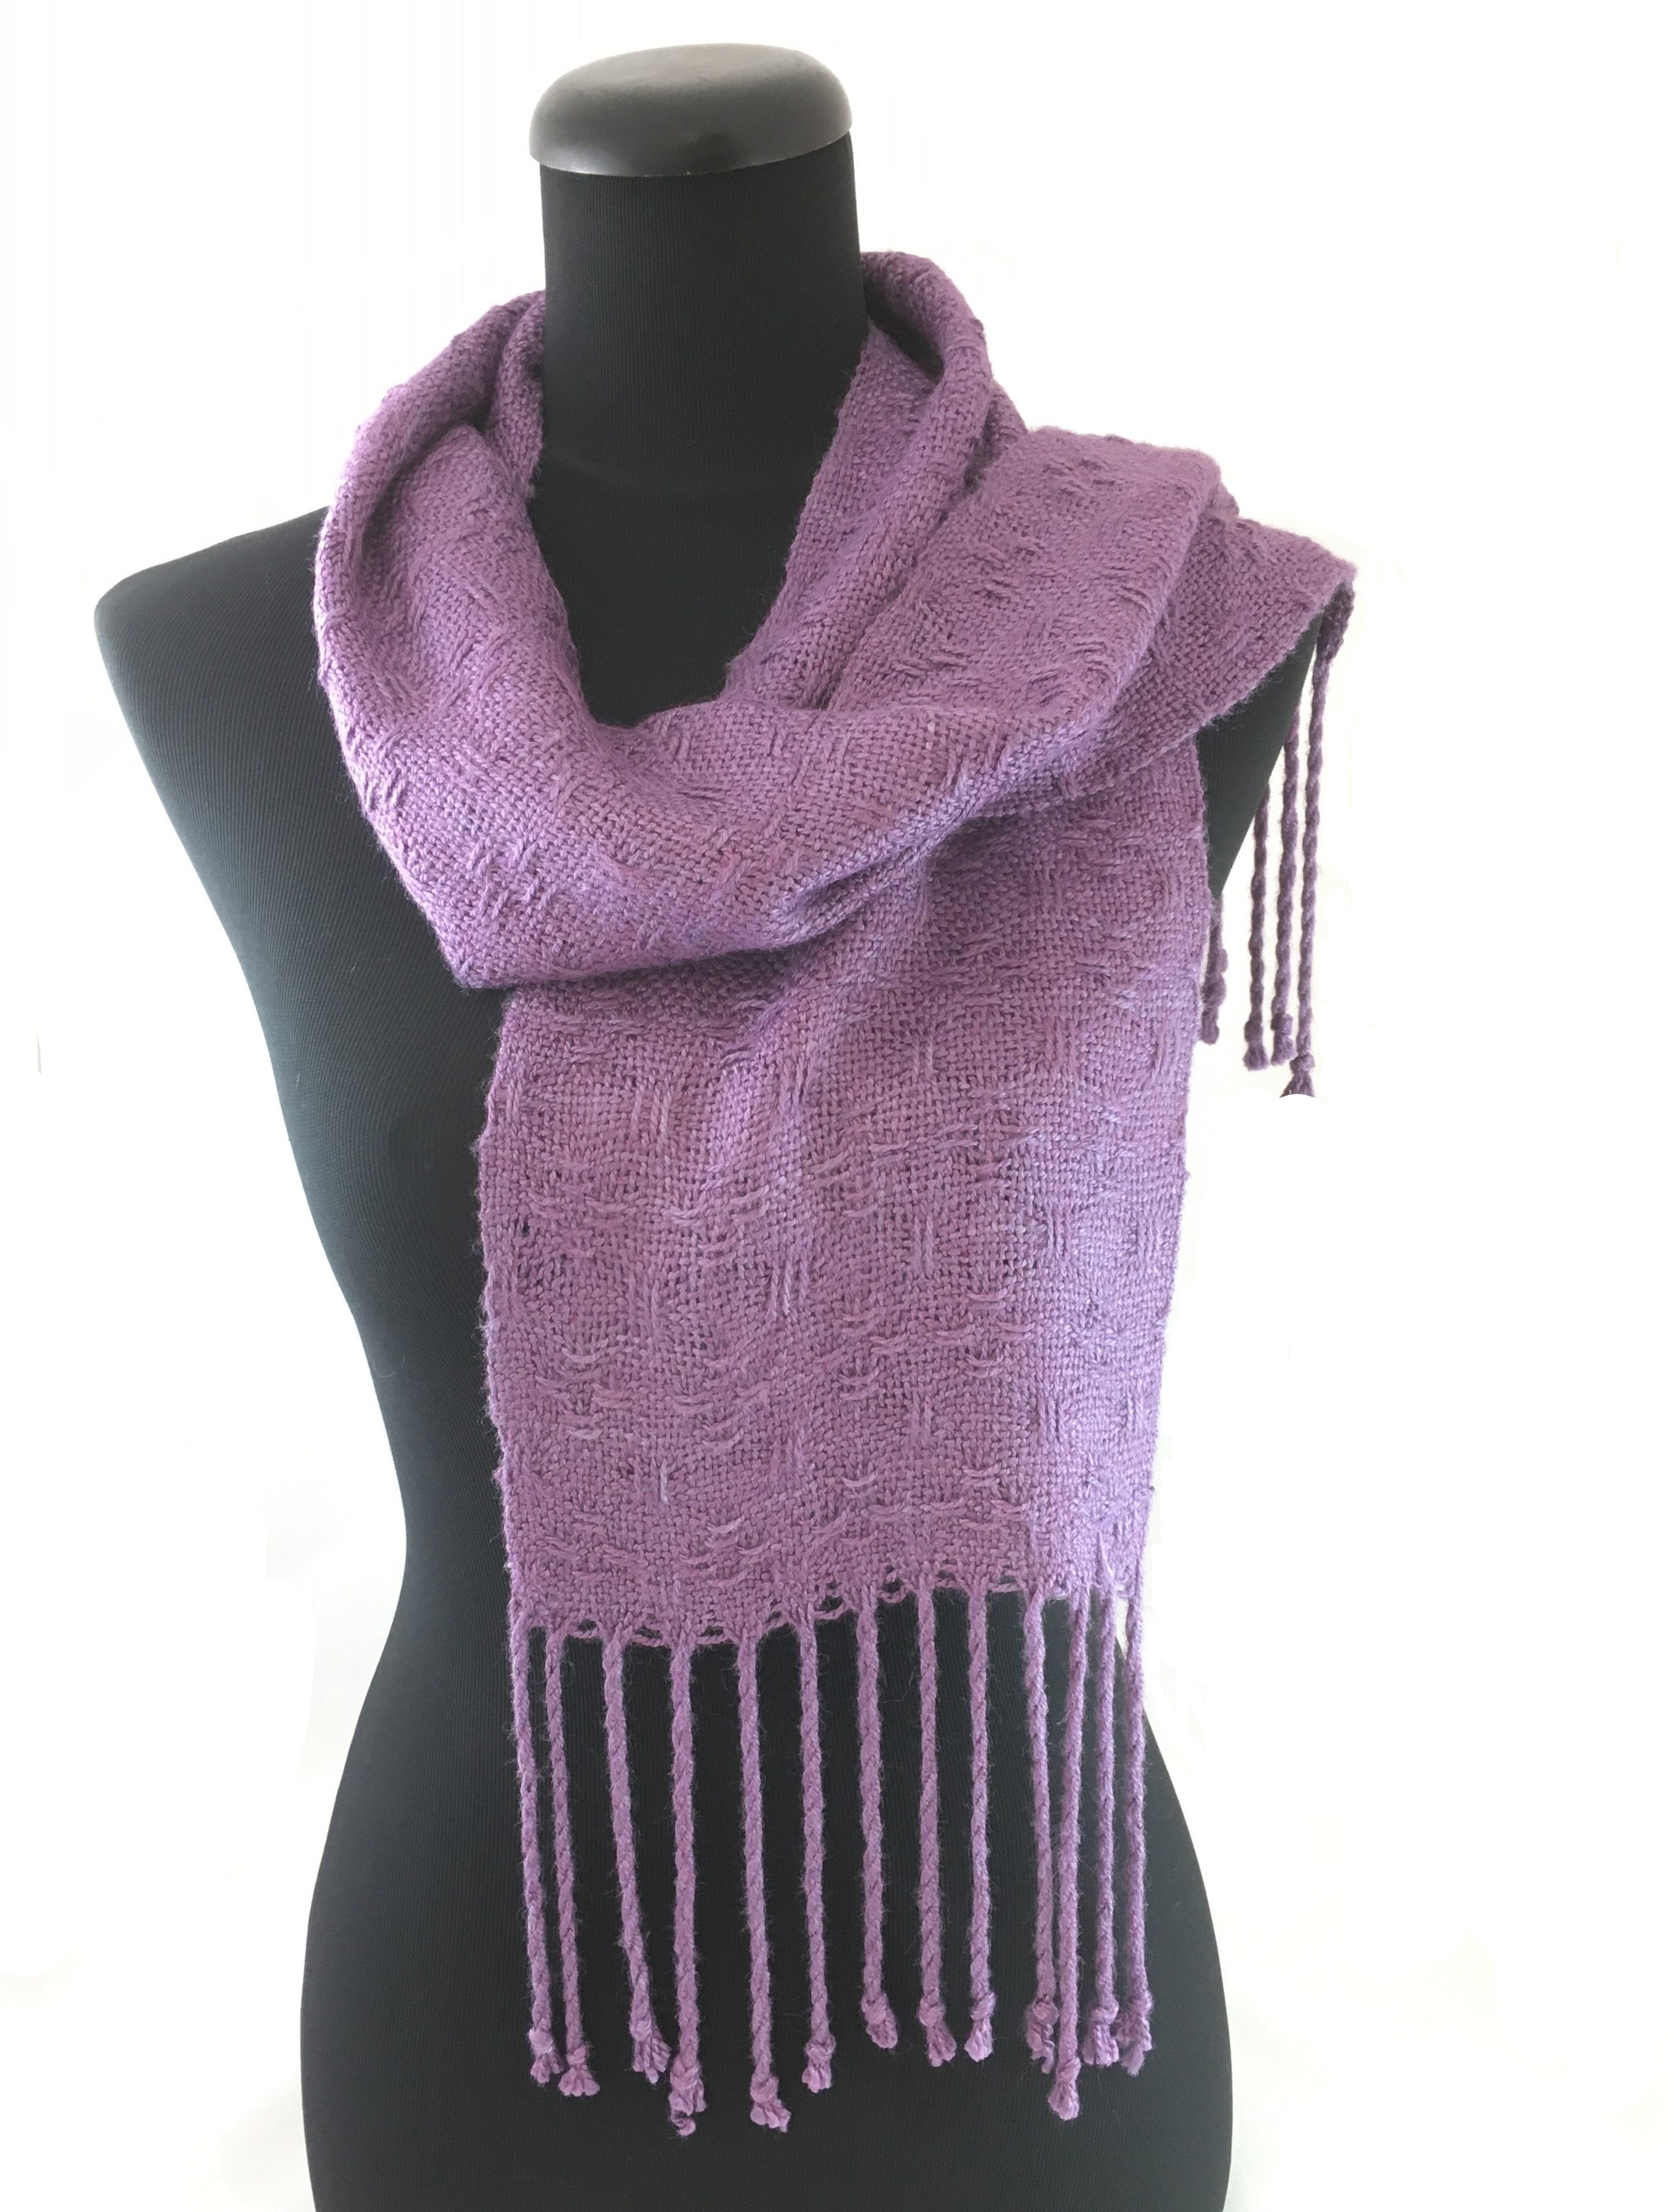 Scarf handwoven by Vicki Lowery